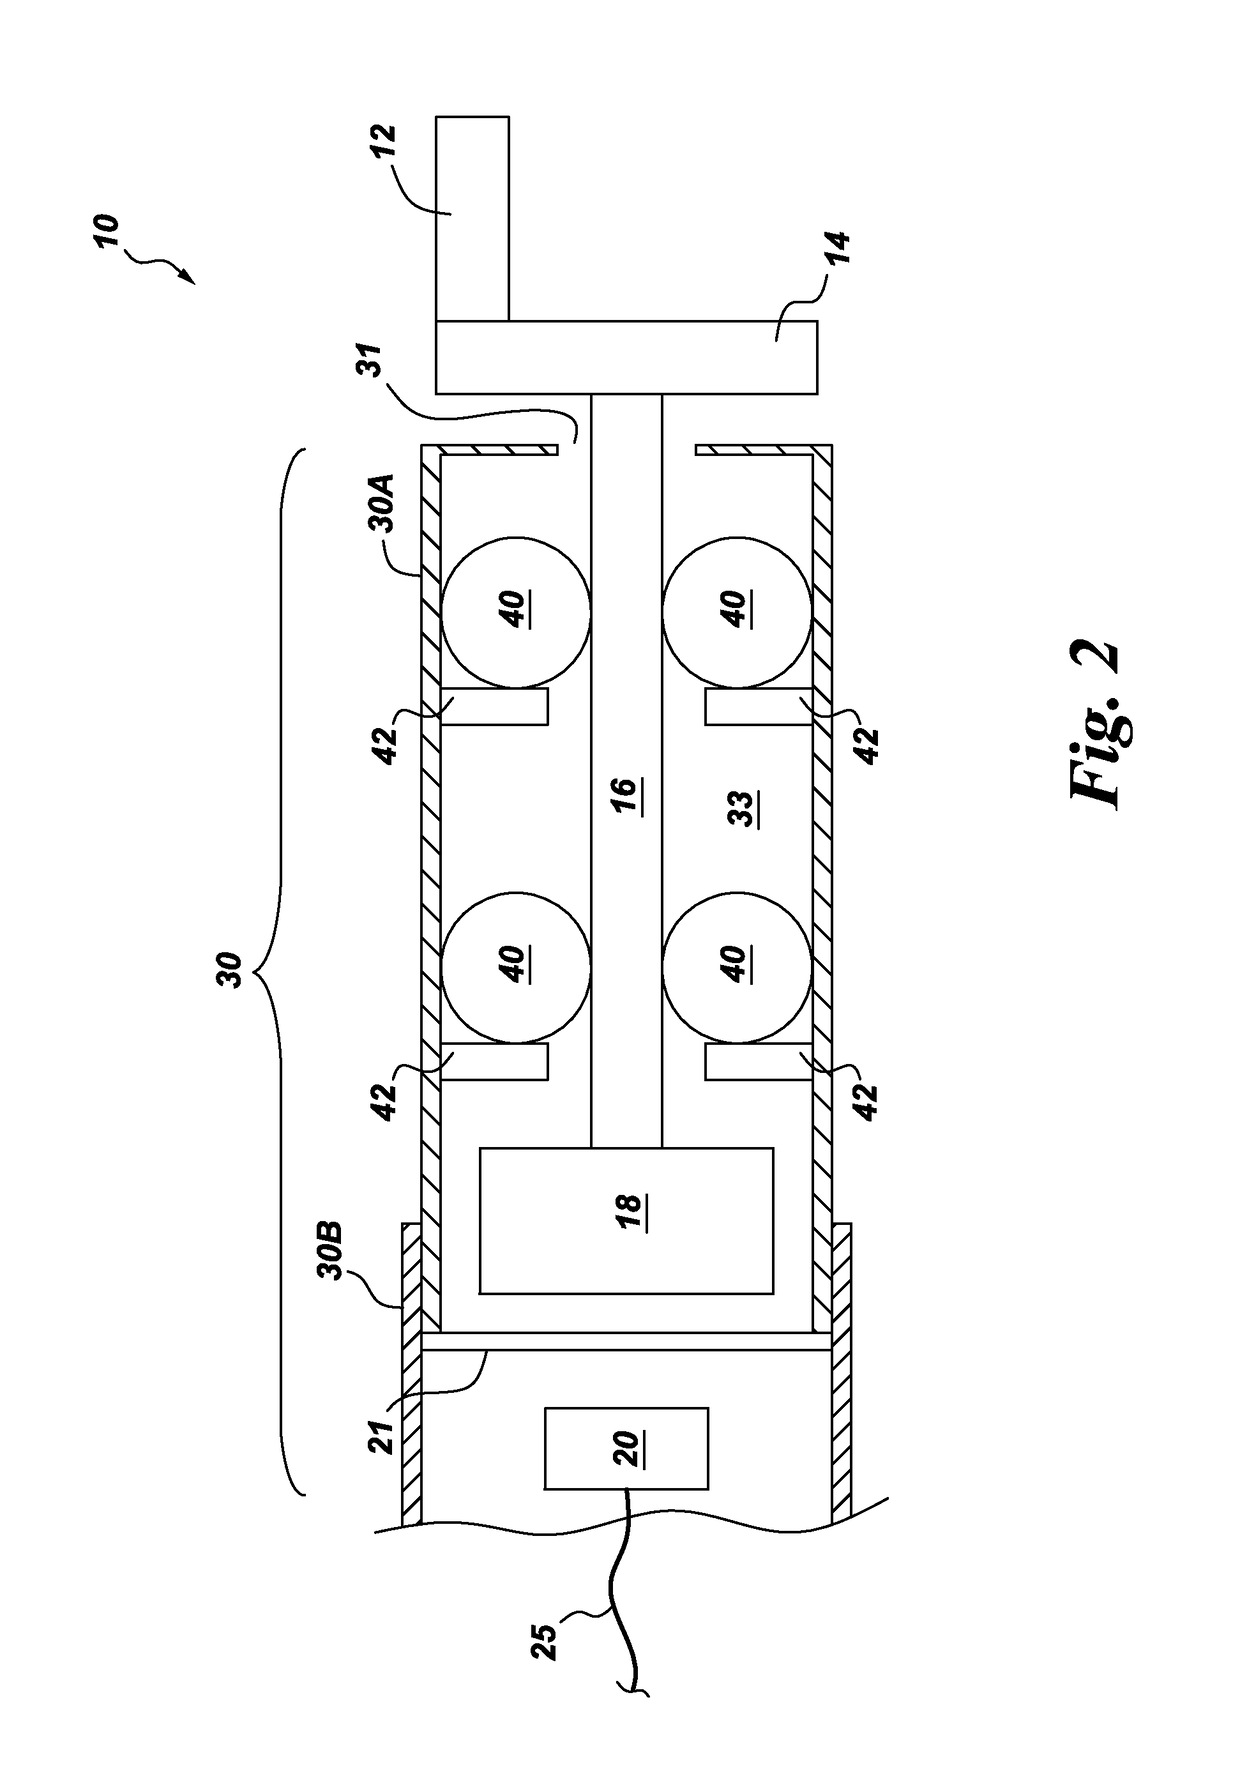 Flow angle probe with a passively rotating vane